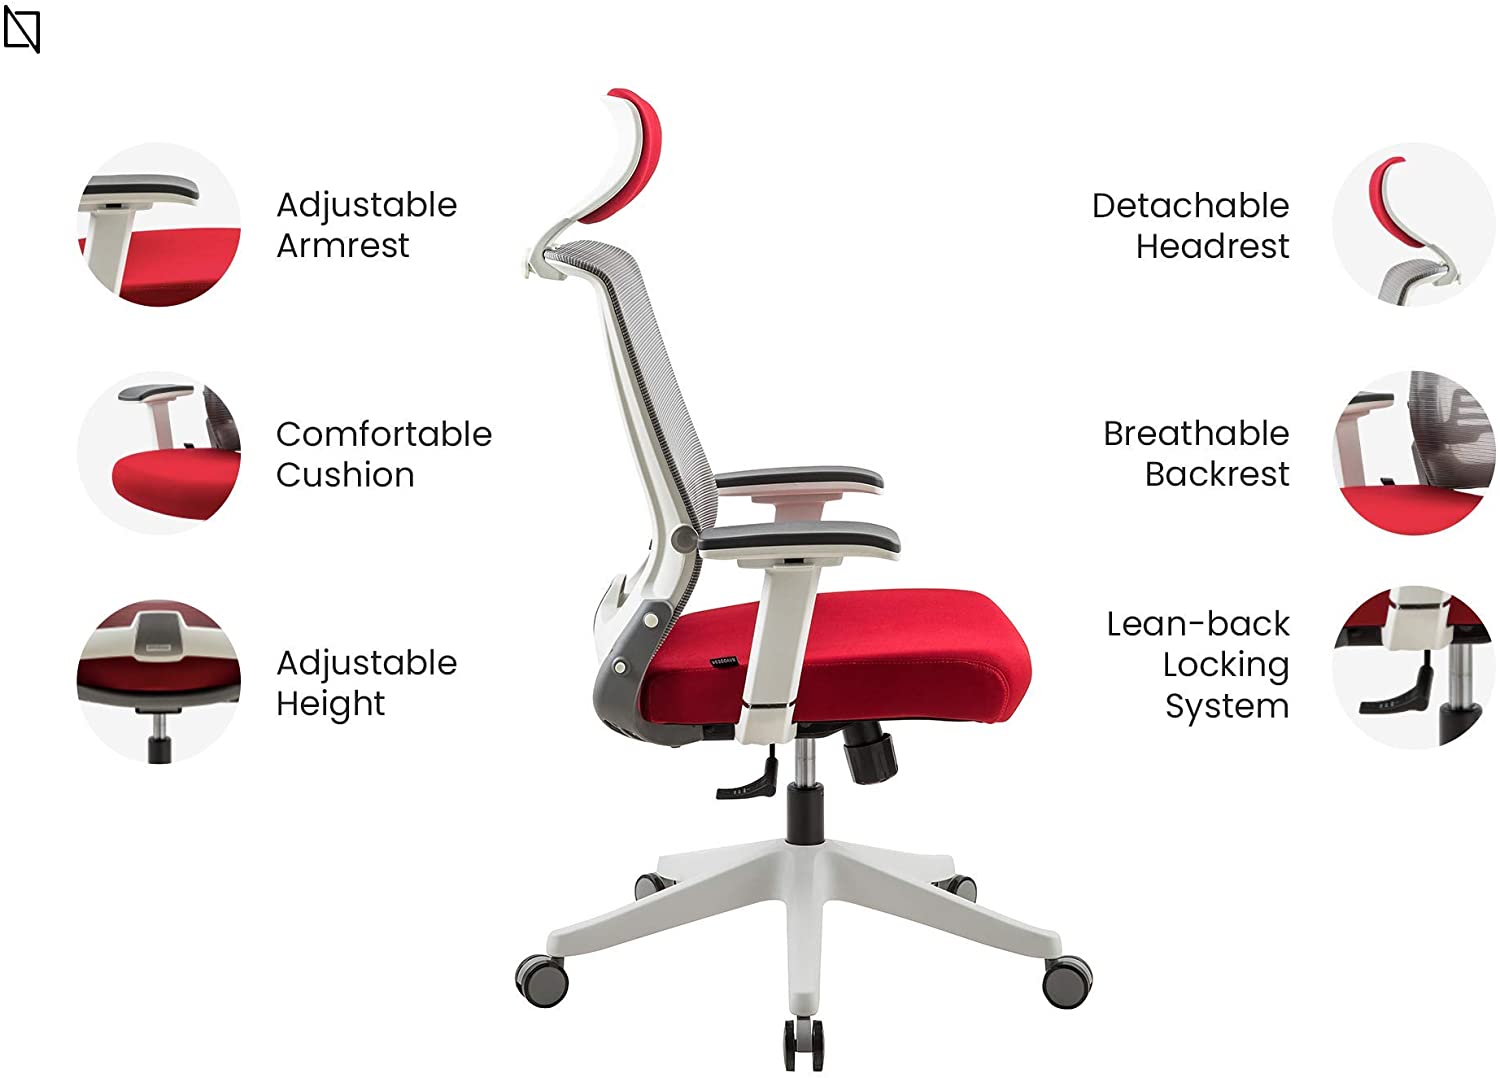 Specifications of Kiko Chairs by Navodesk